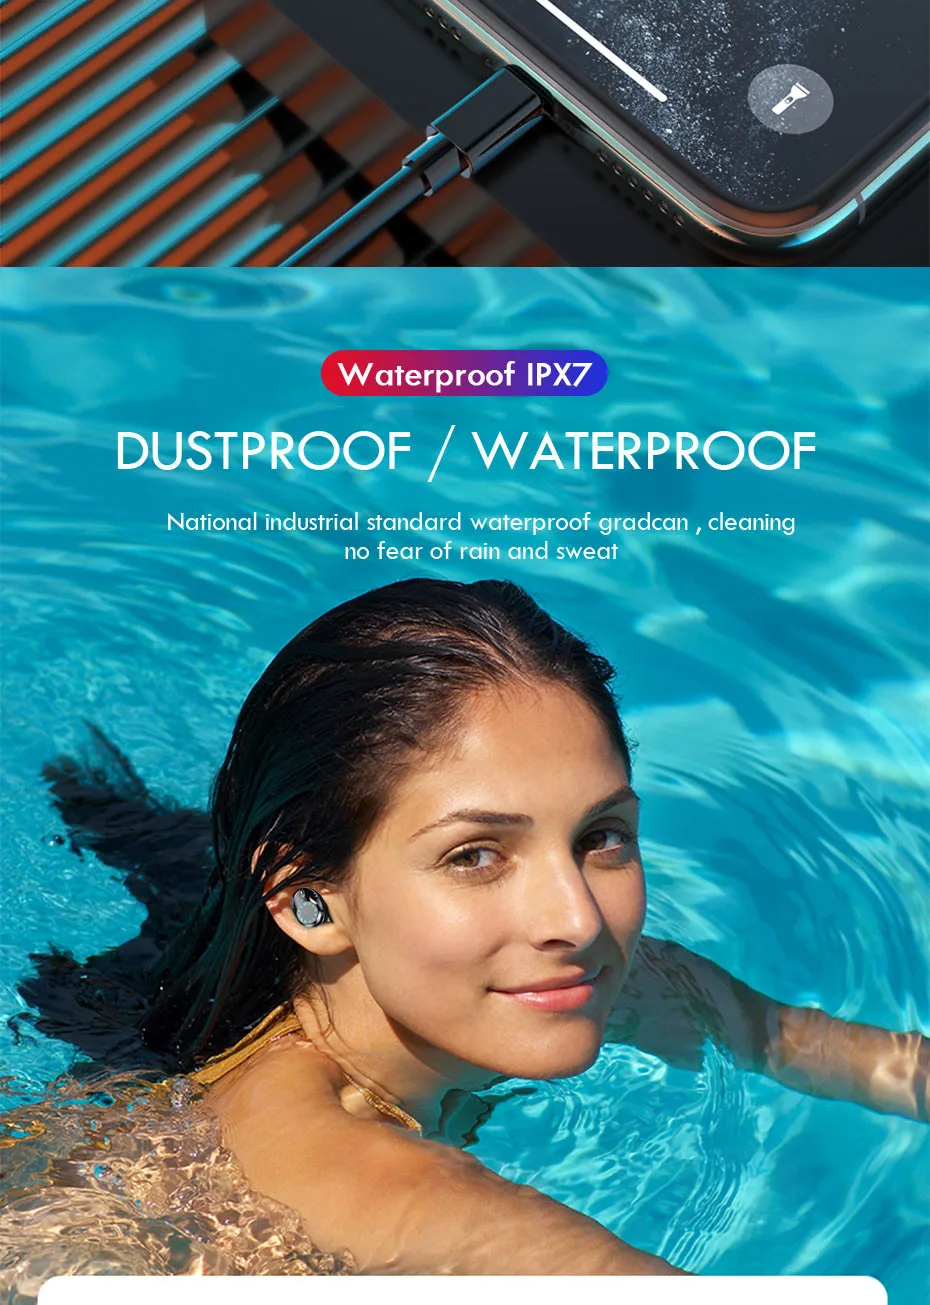 Wireless Headphones IPX7 Waterproof Touch Control 9D TWS Bluetooth 5.0 Stereo Earbuds Sports Earphones Headsets with Microphone